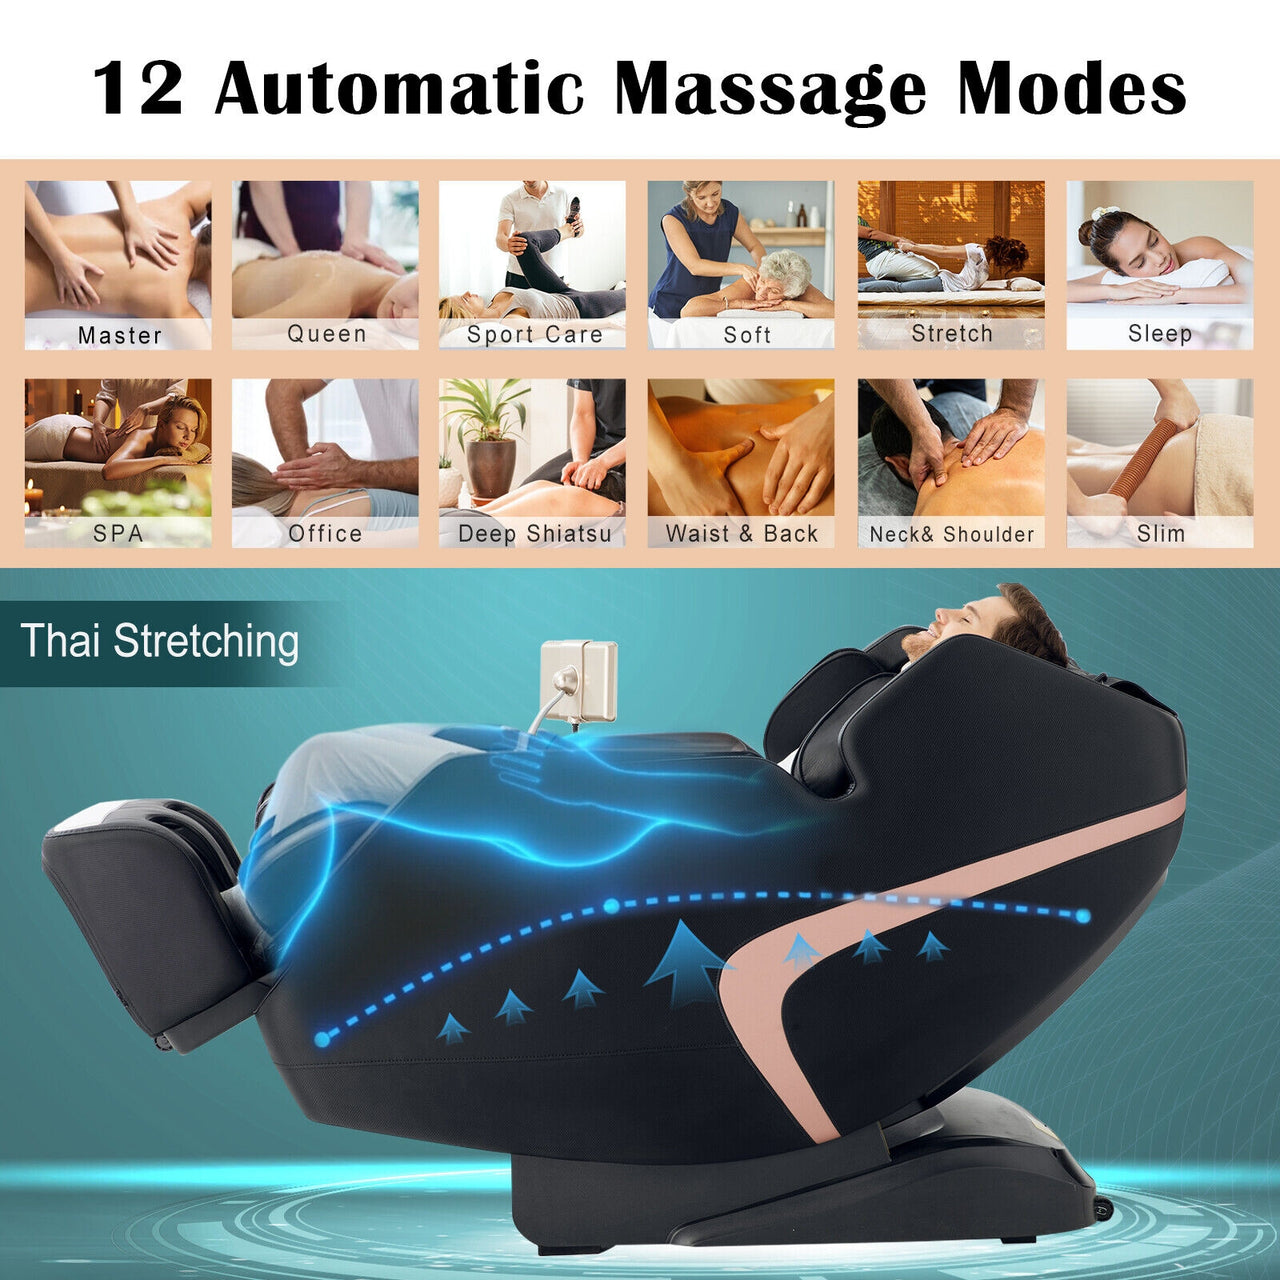 Enjoyment 13 - 3D SL-Track Full Body Zero Gravity Massage Chair with Thai Stretch - Gallery View 5 of 10